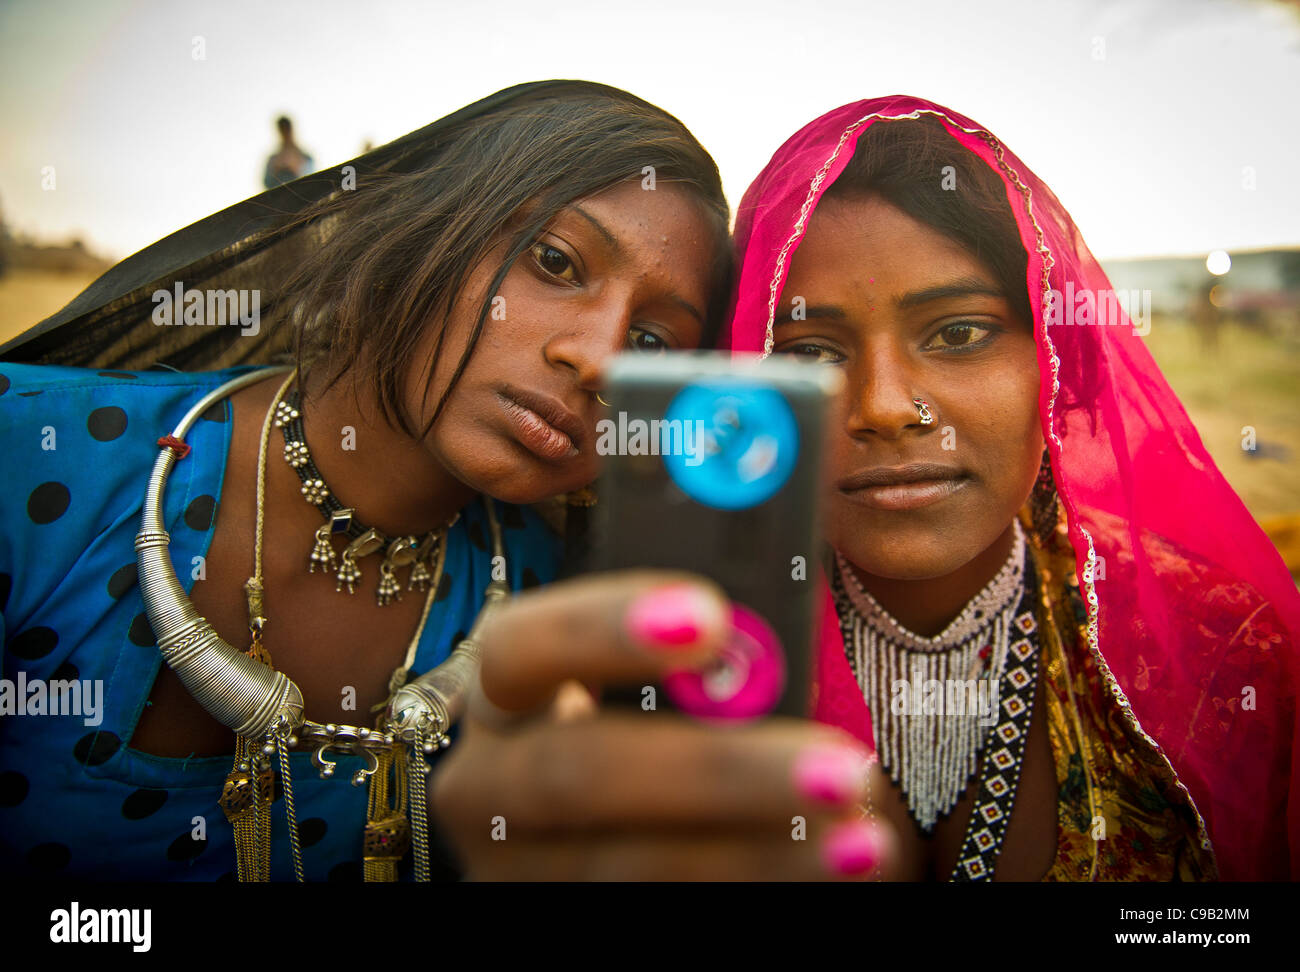 Anita Devi, 13, right and Subita Devi, 13 take a photo with their mobile phone at the world's largest annual cattle fair in the Stock Photo